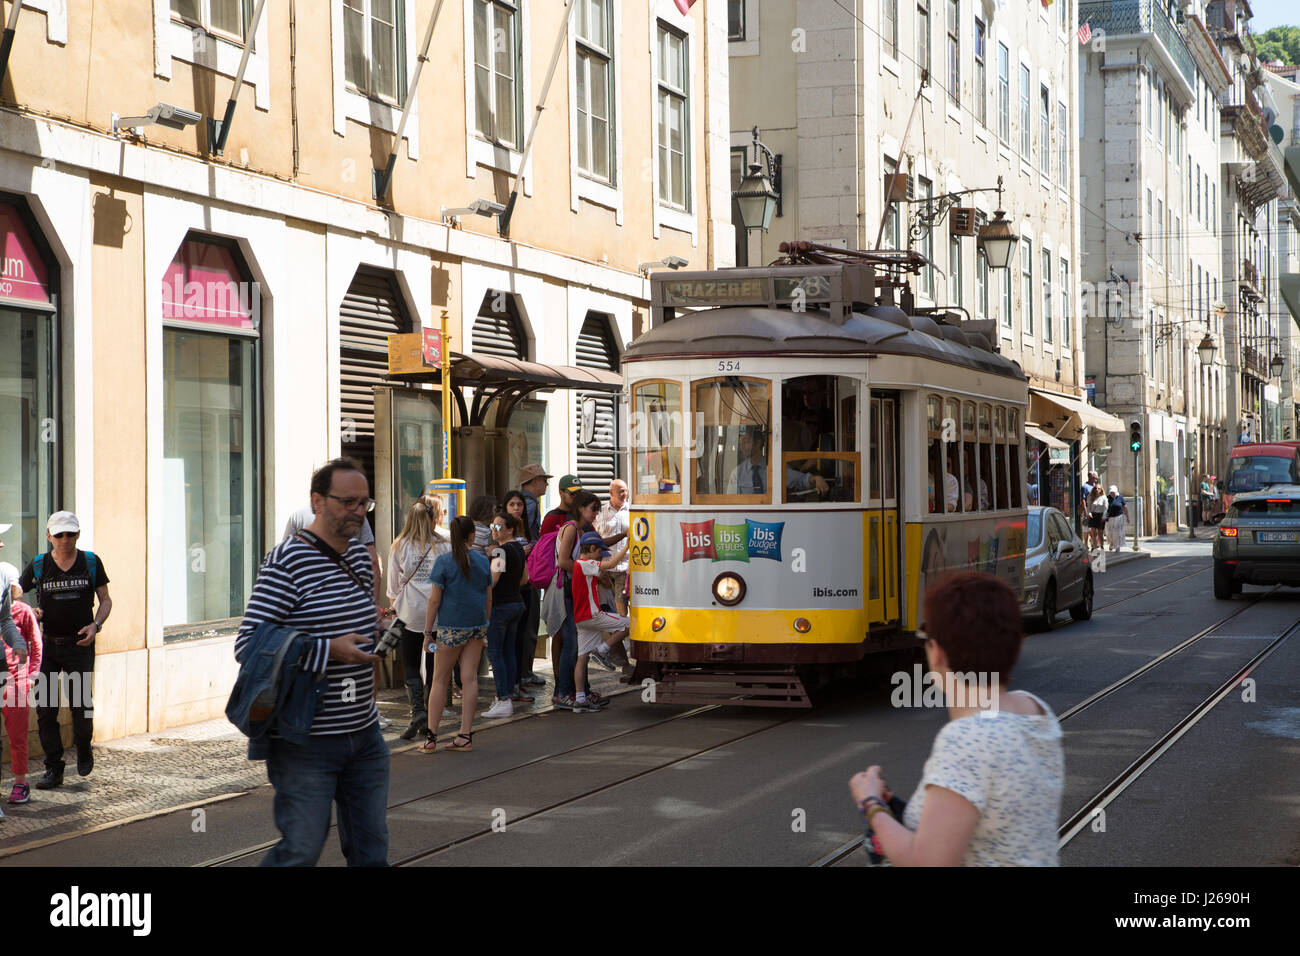 A tram in Lisbon, Portugal. Stock Photo